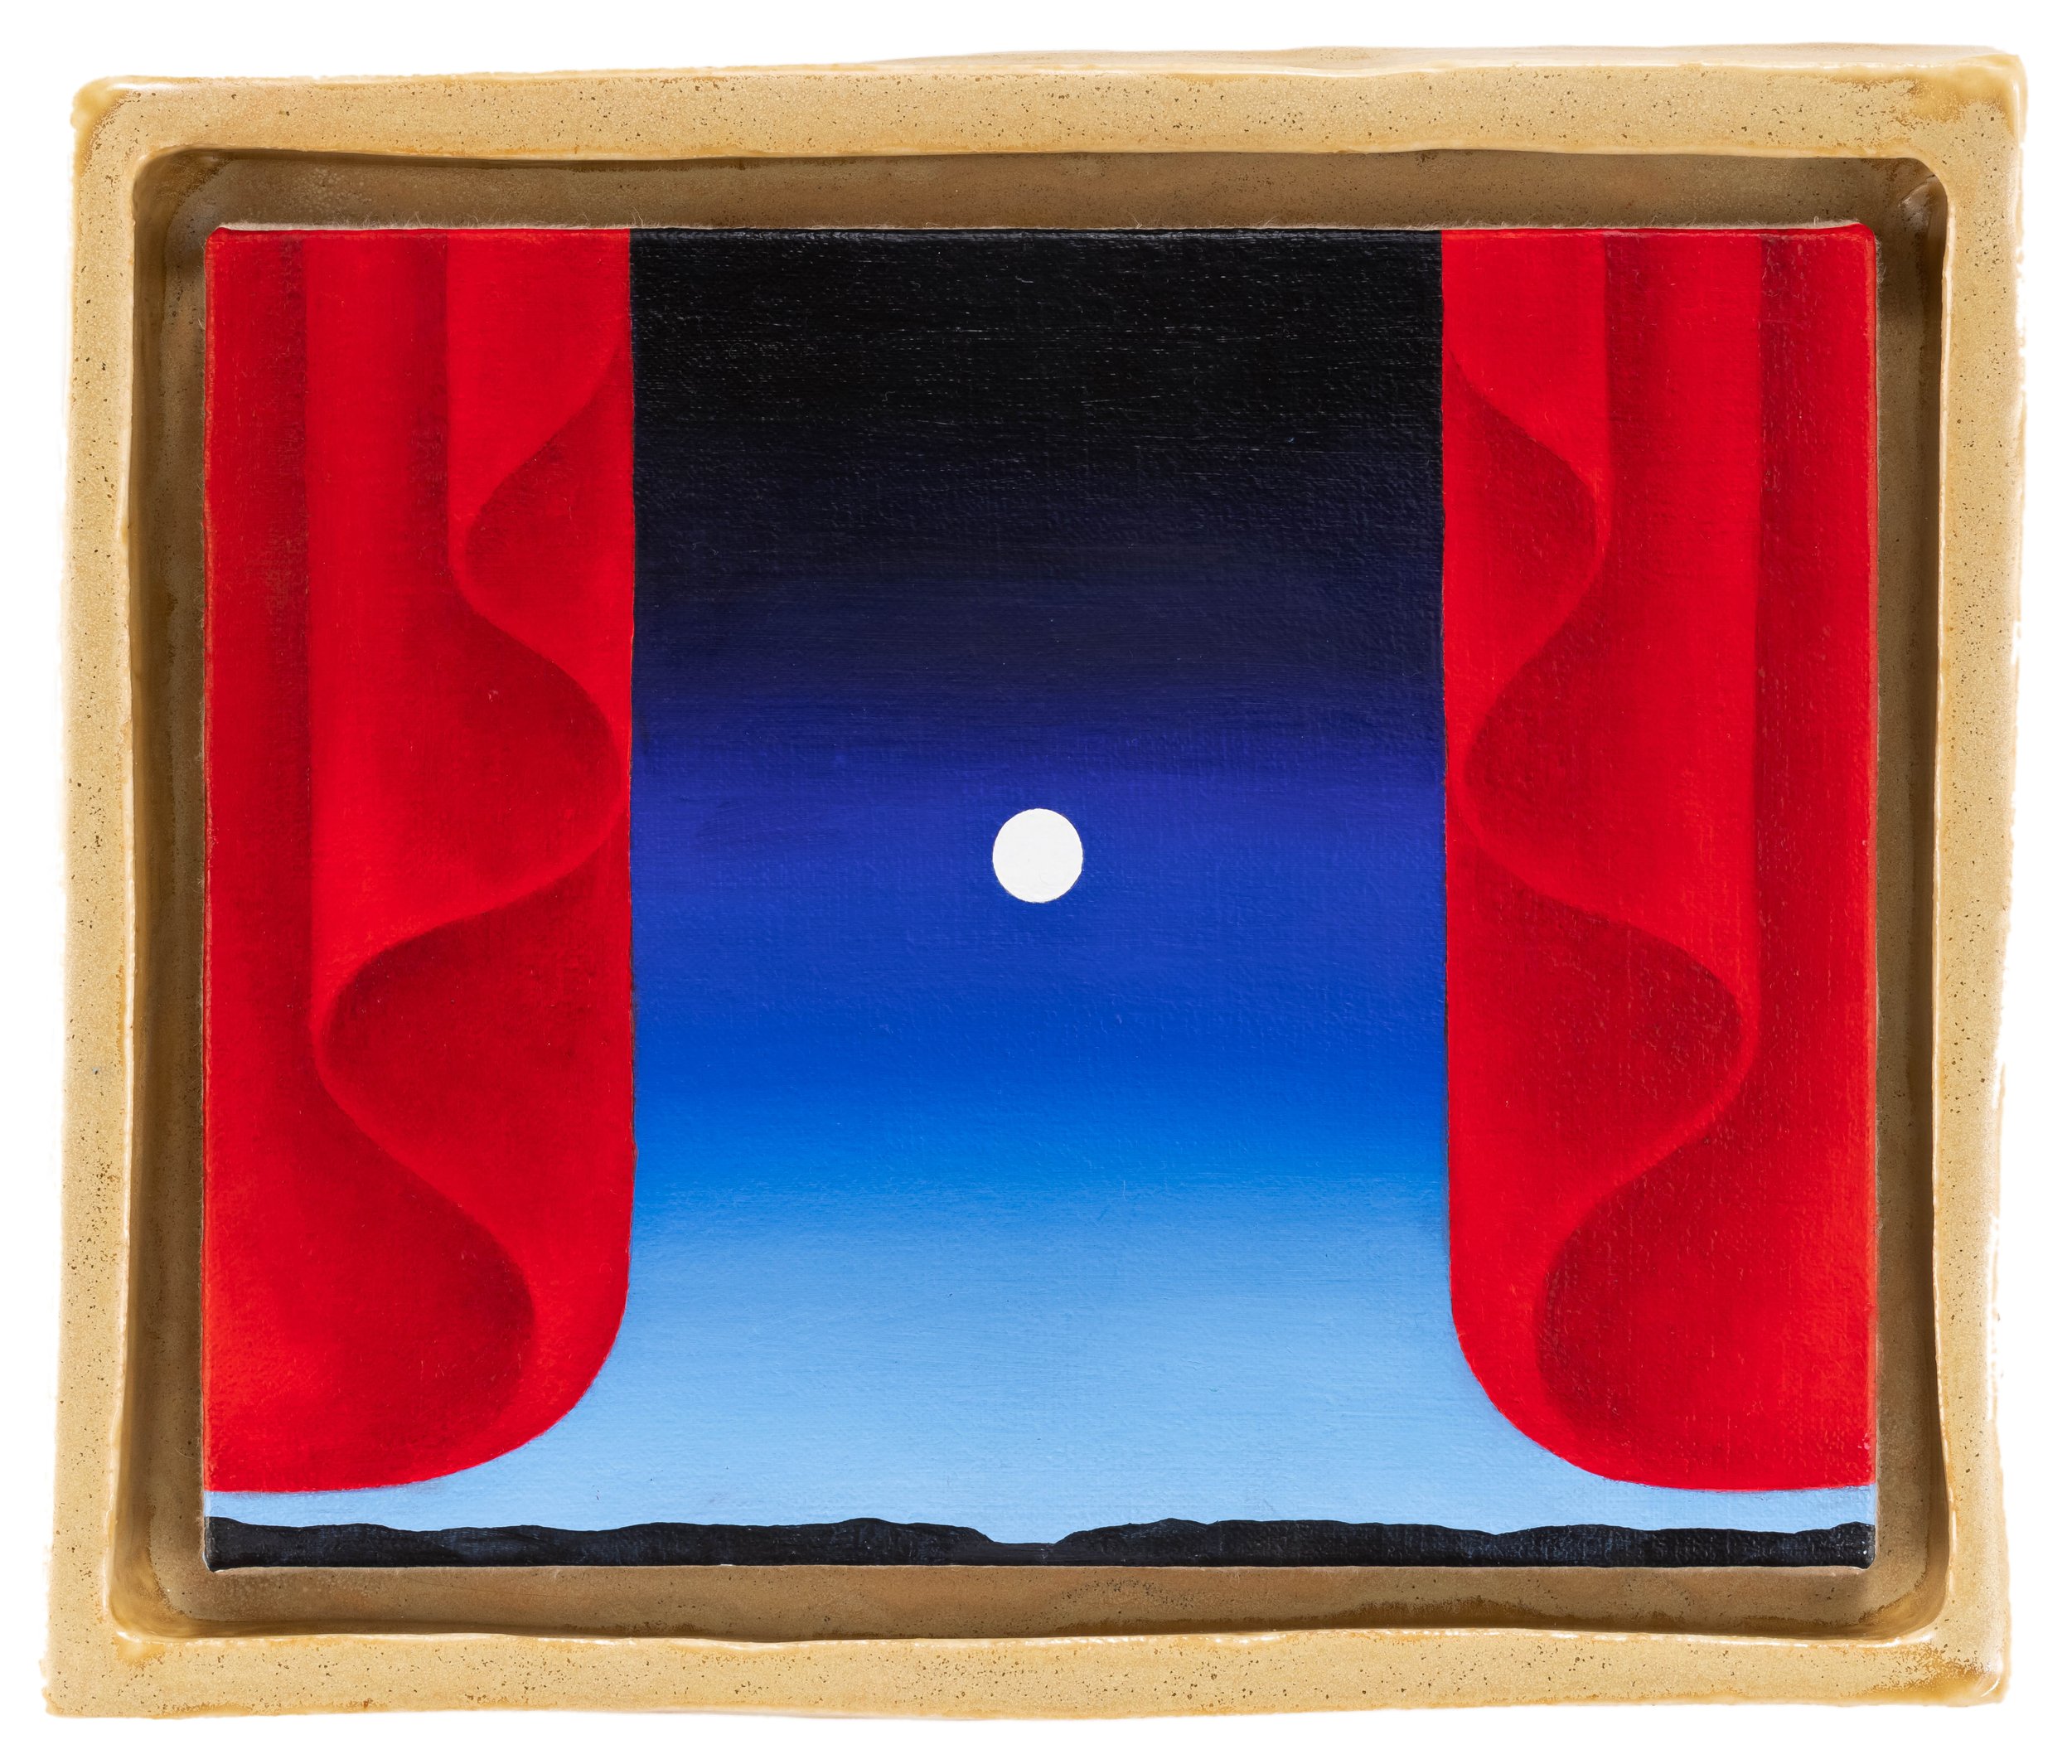 HALO | 9.5 x 11.5 x 1.5 inches / 24.1 x 29.2 x 3.8 cm, oil on linen in porcelain frame, 2022